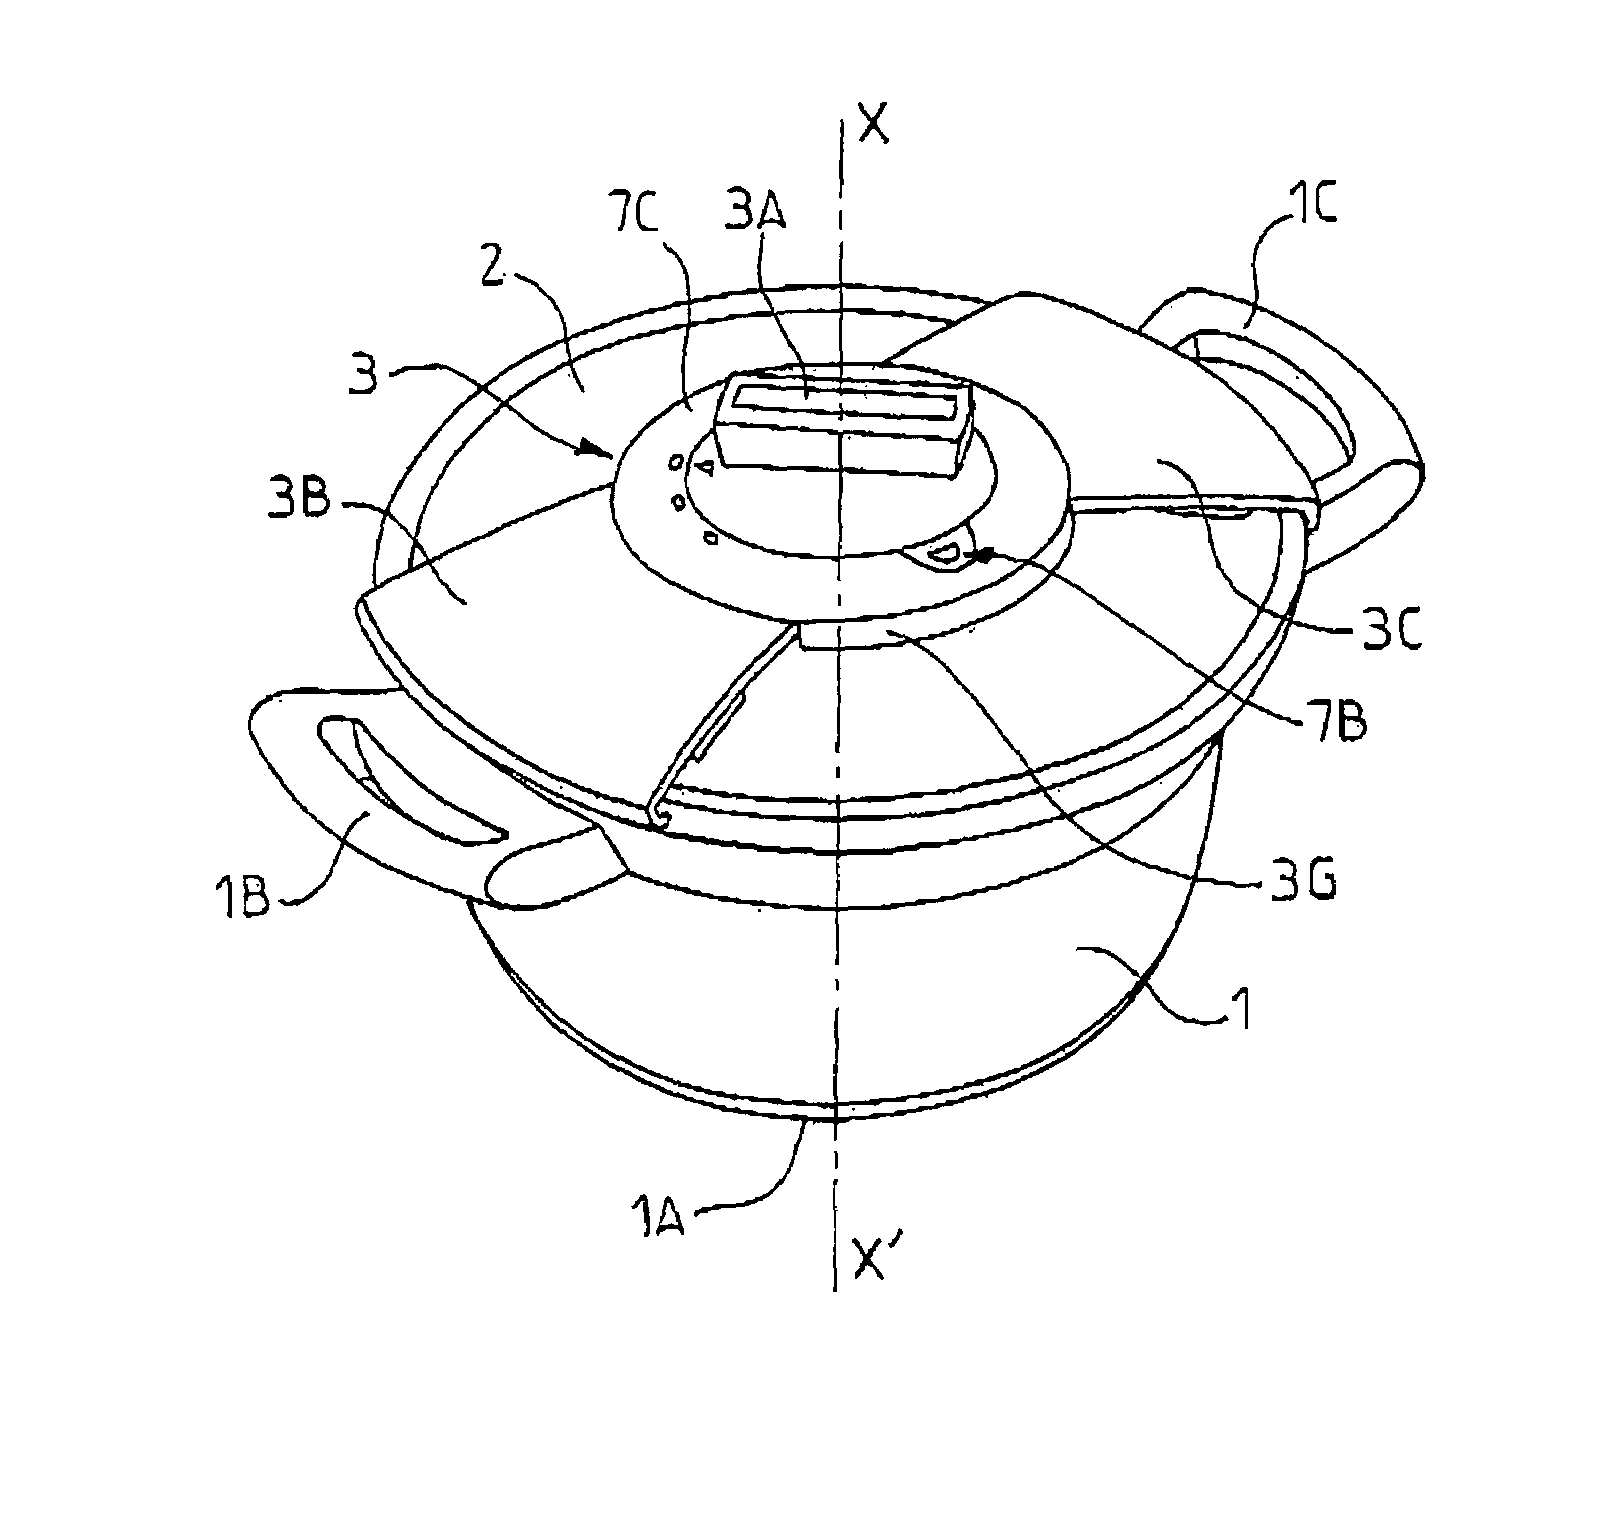 Appliance for cooking food under pressure